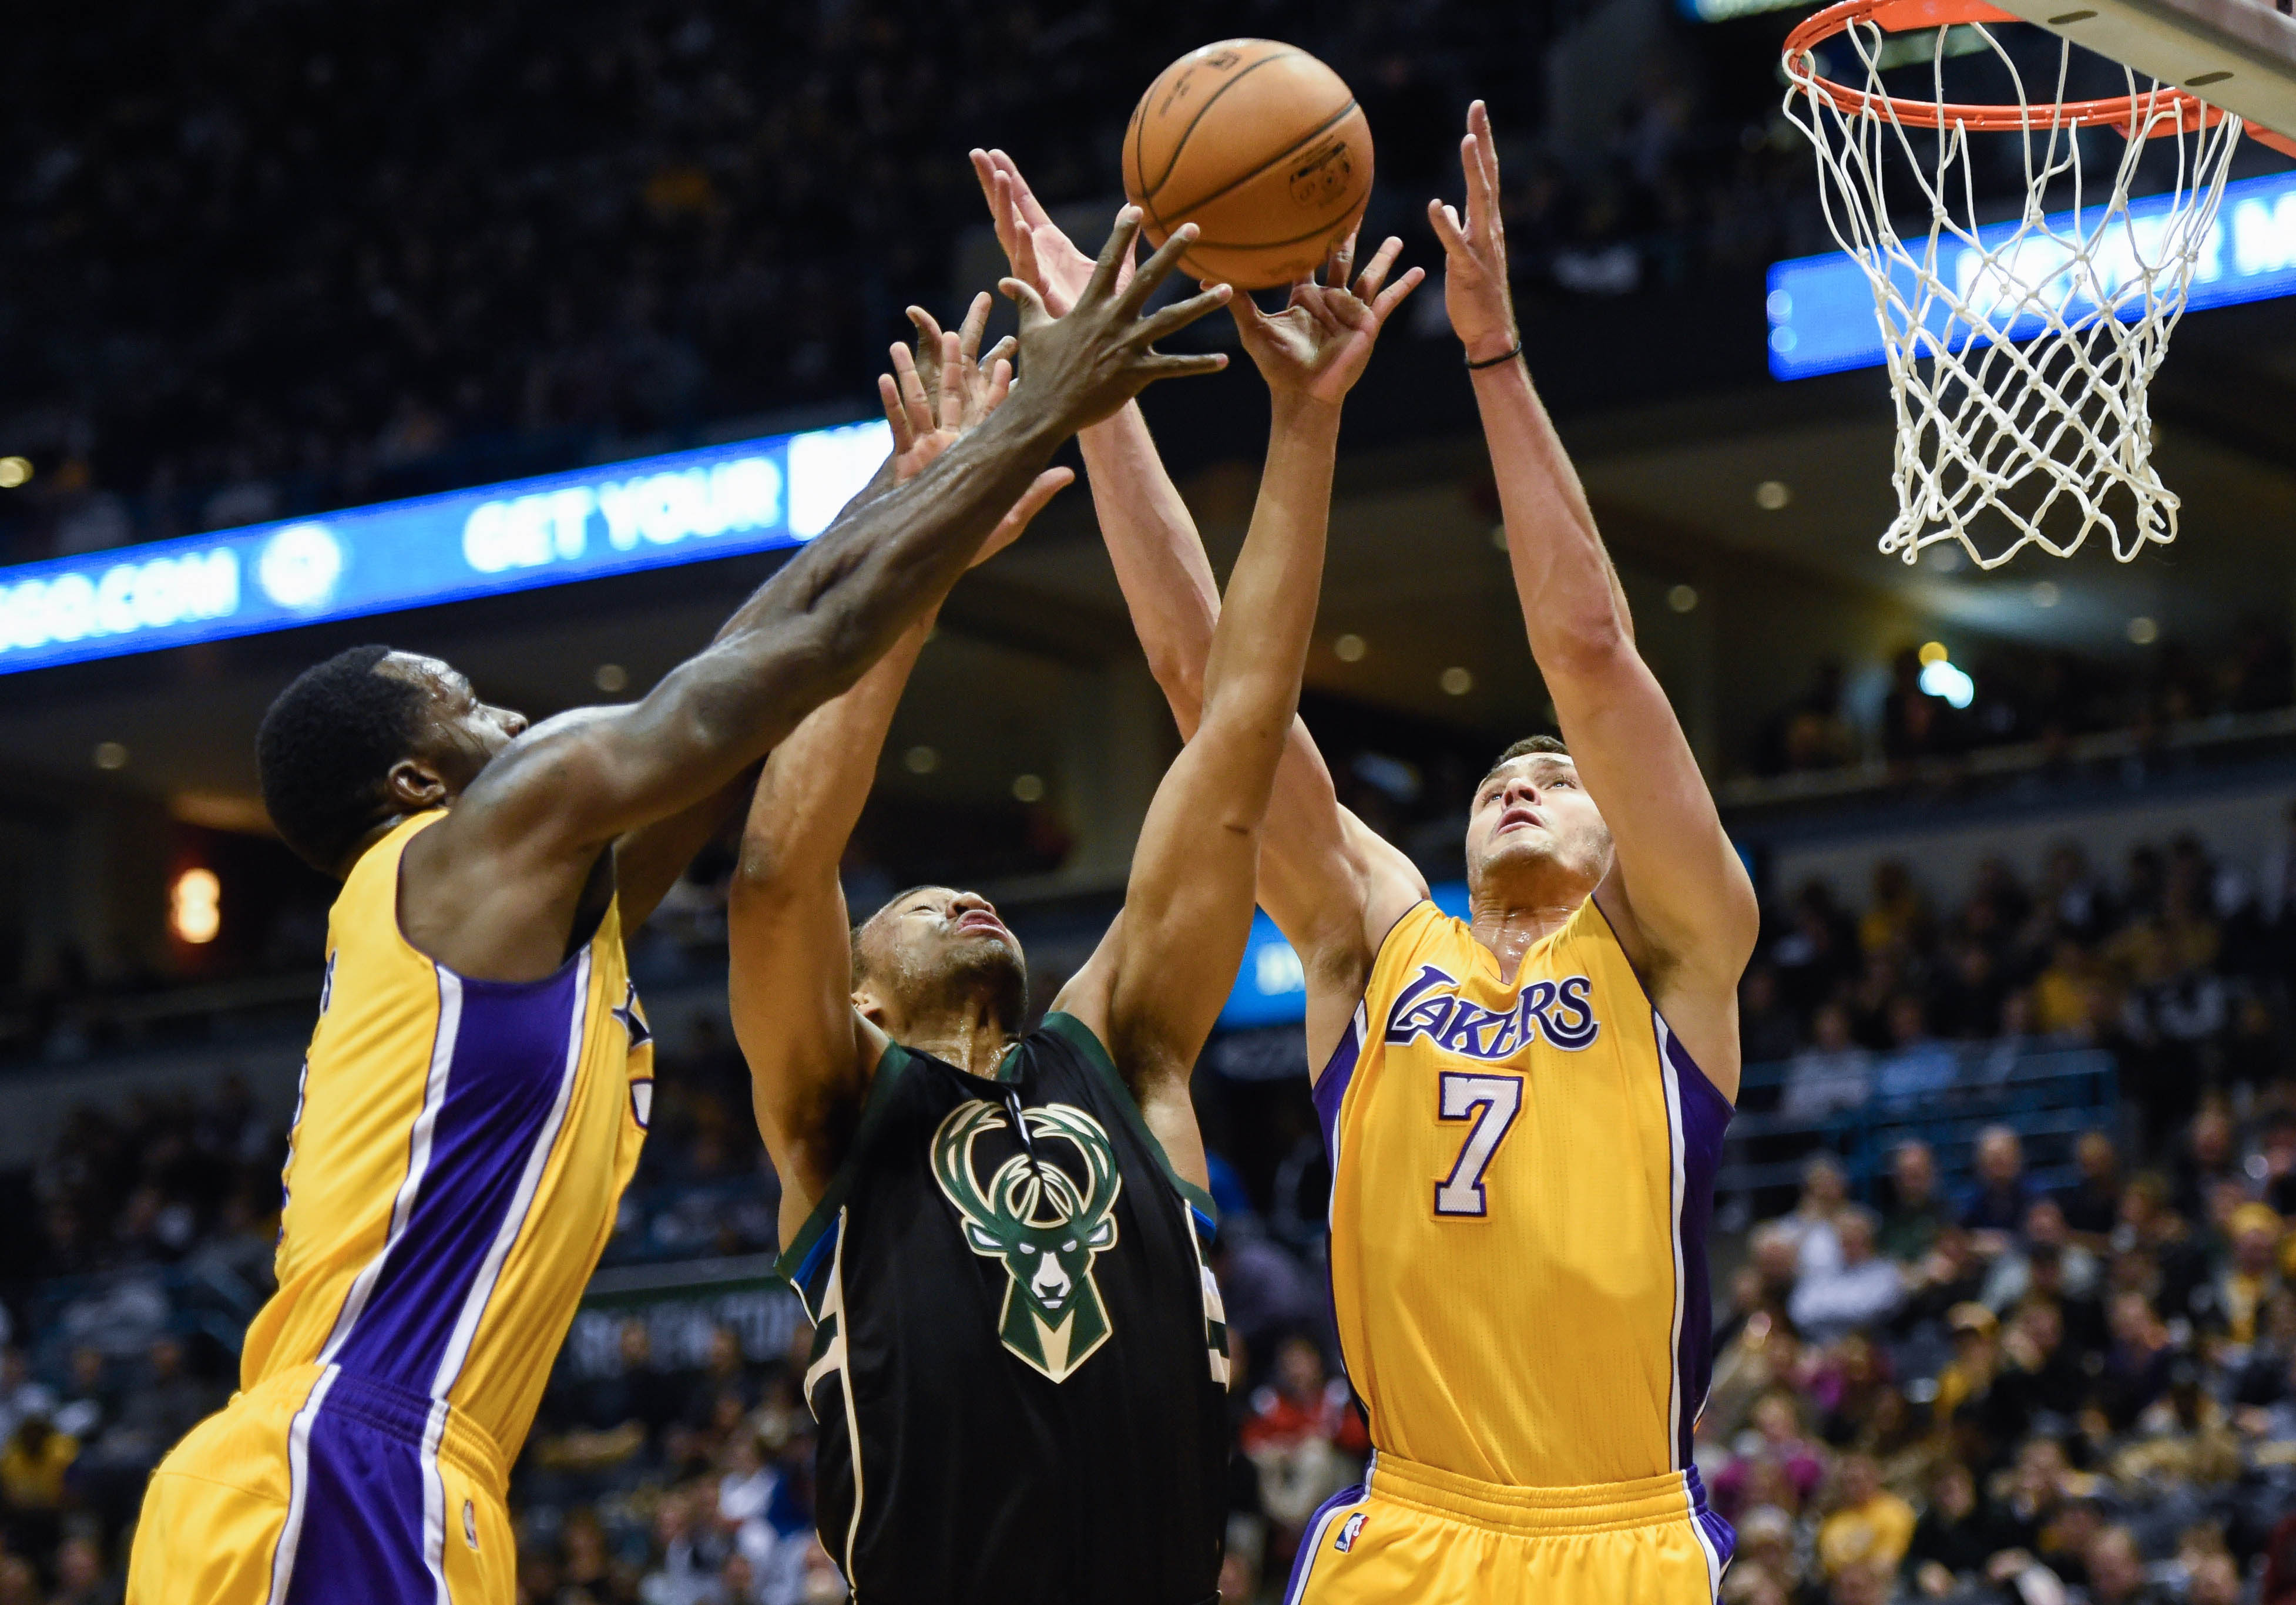 Bucks at Lakers live stream: How to watch online - FanSided